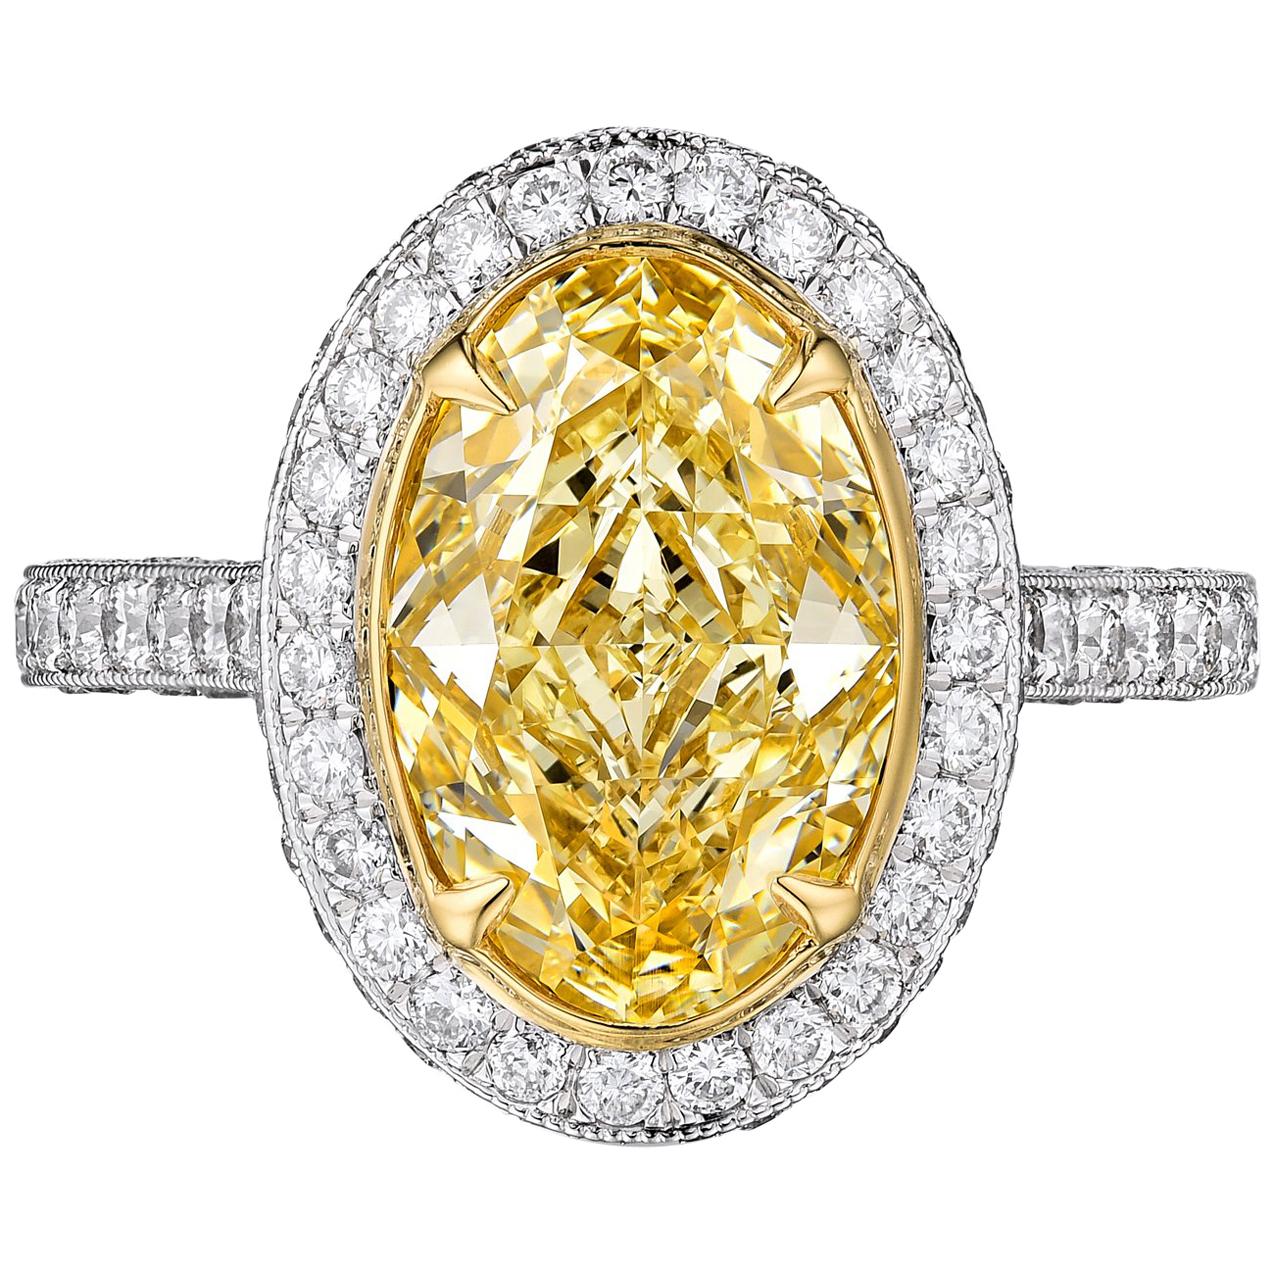 Certified 3.17 Carat Fancy Yellow Oval Diamond Engagement Ring in Platinum